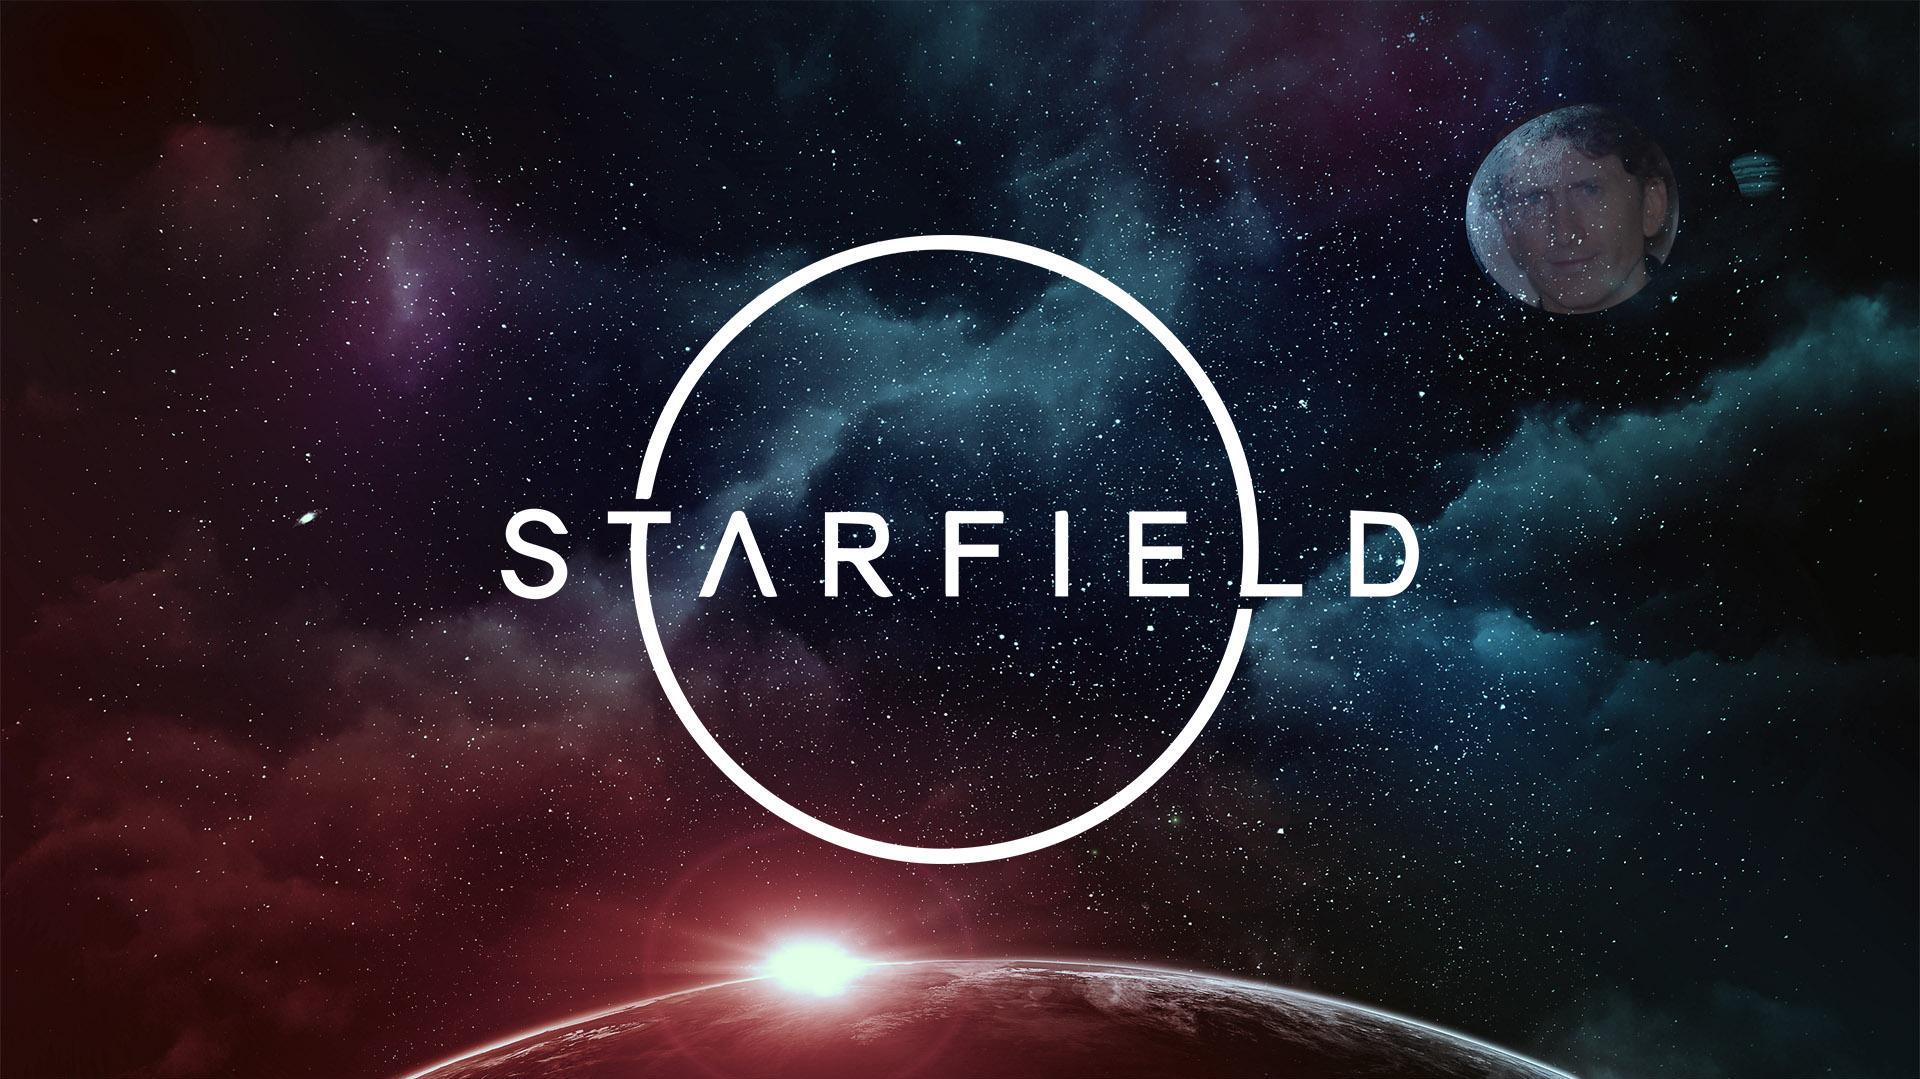 New Starfield Wallpaper With Todd You Guys Wanted This R